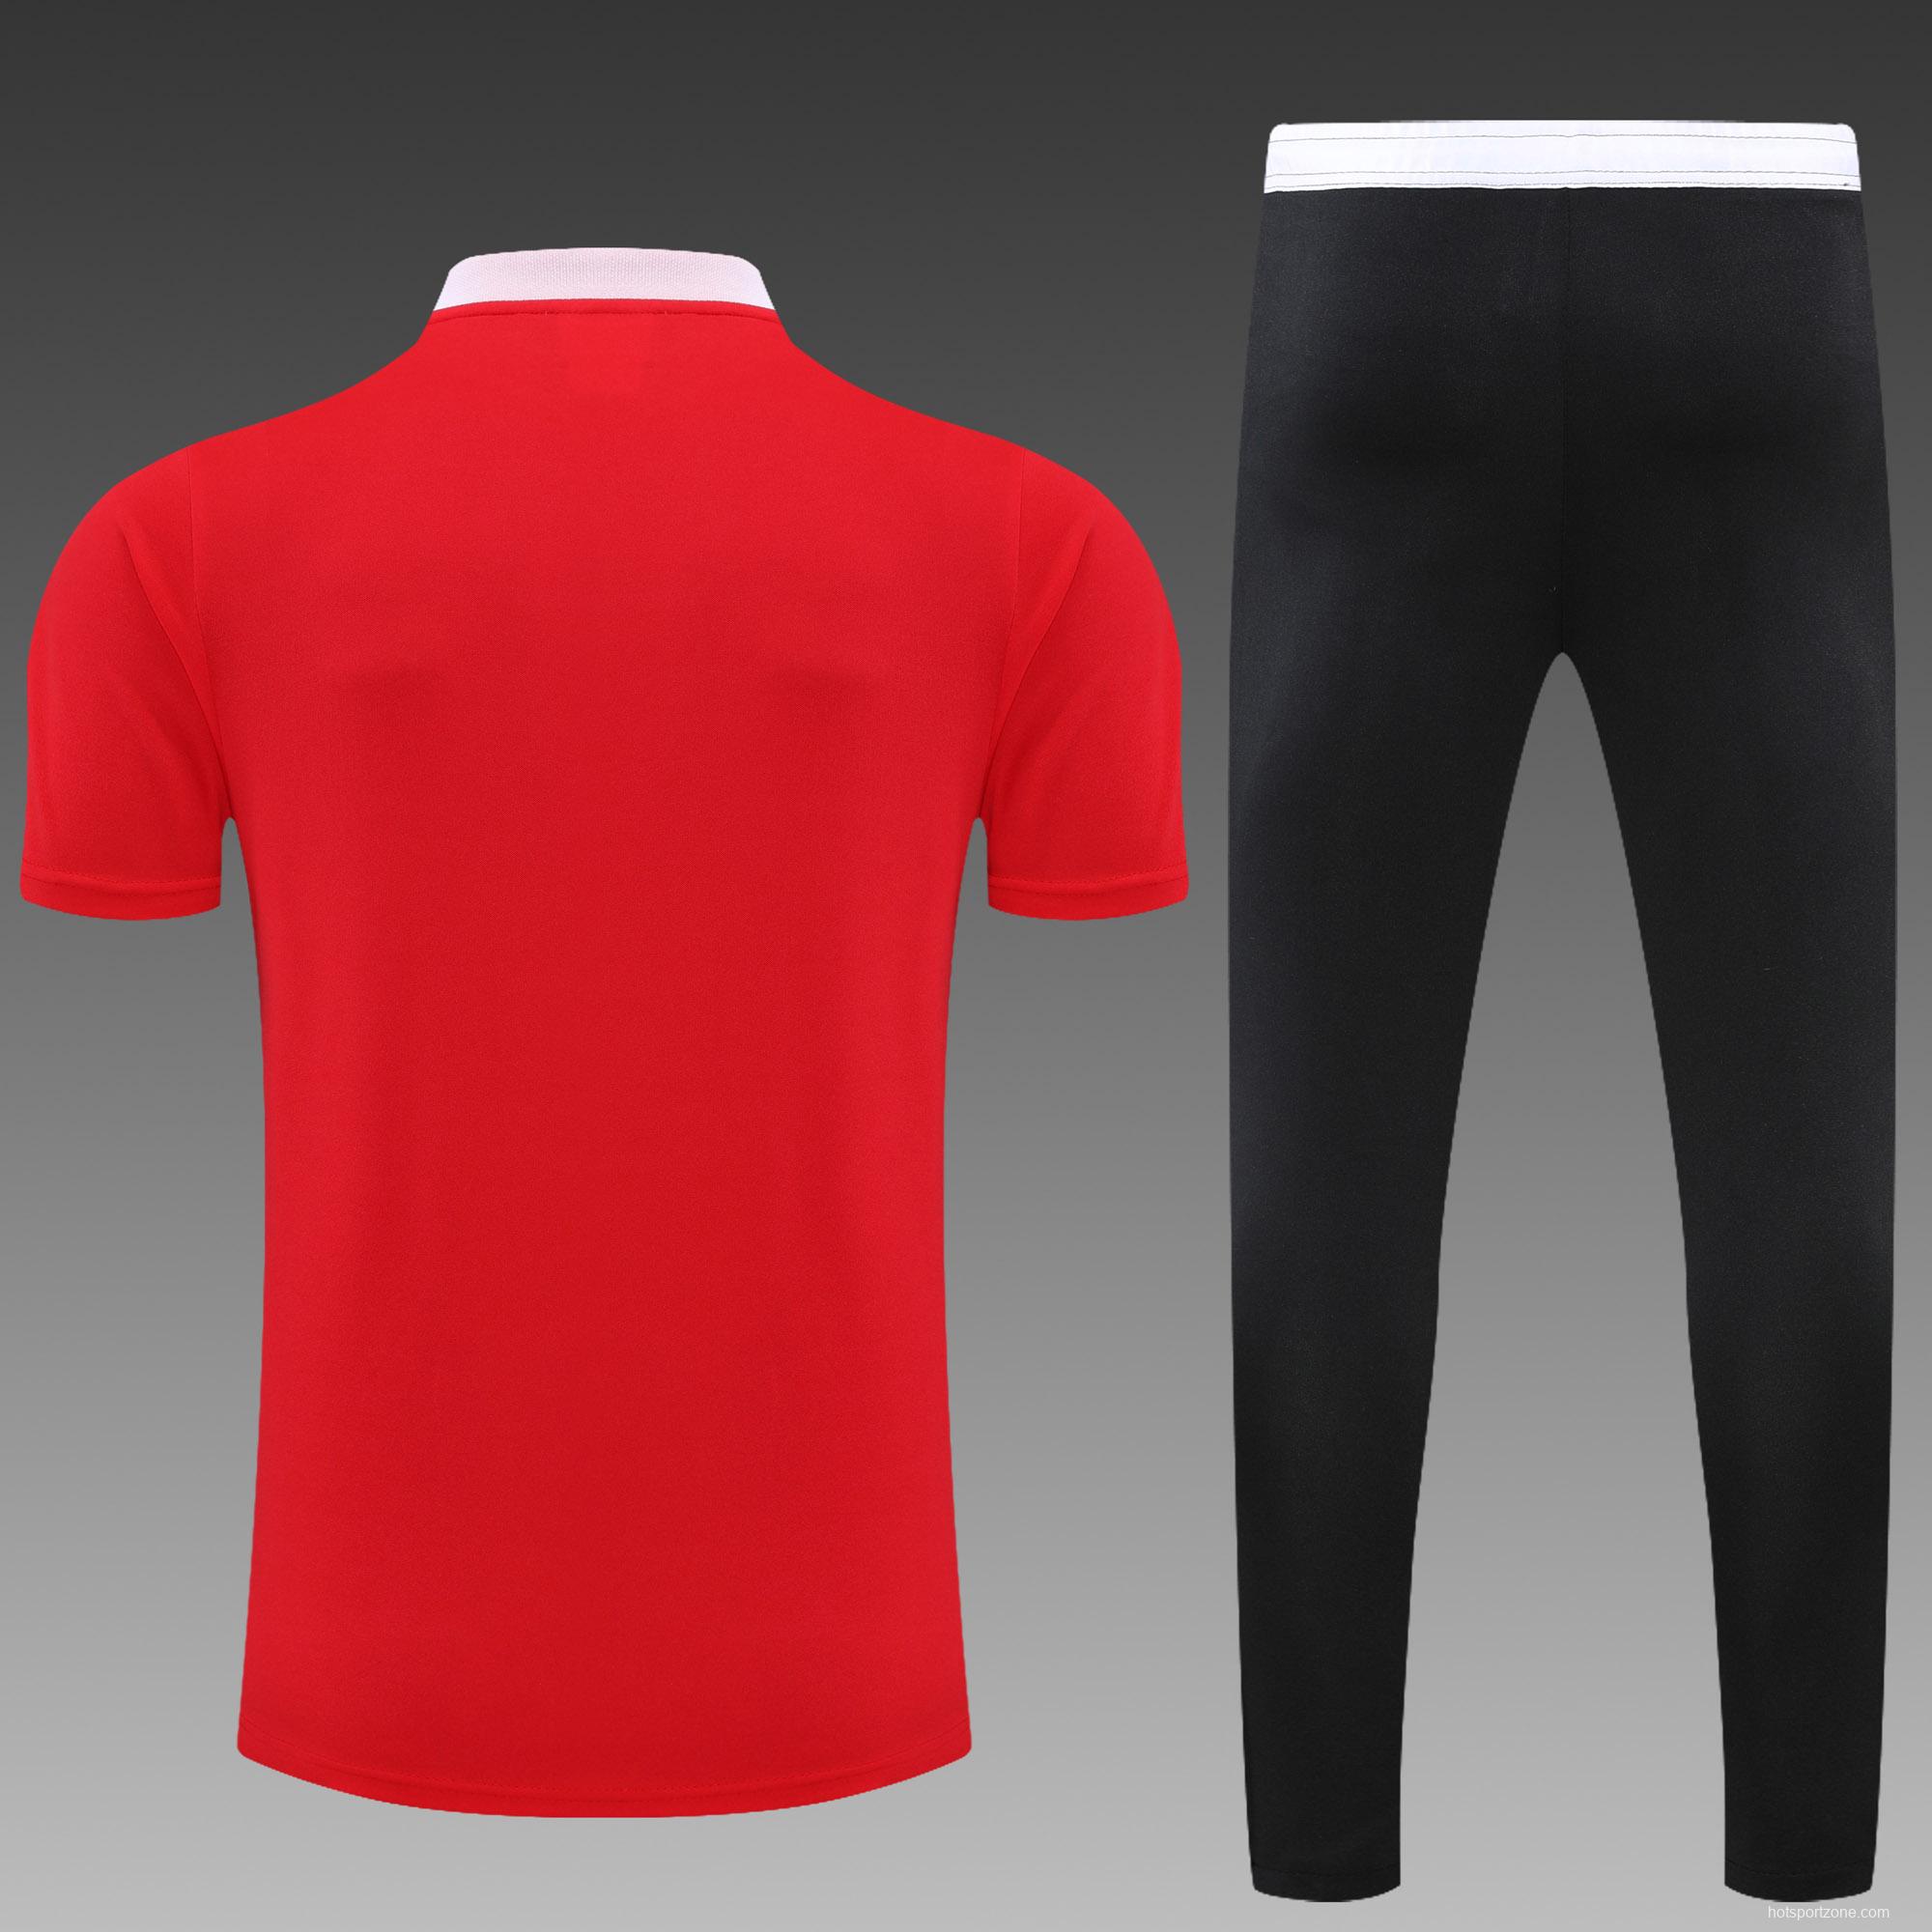 Ajax POLO kit Red (not supported to be sold separately)